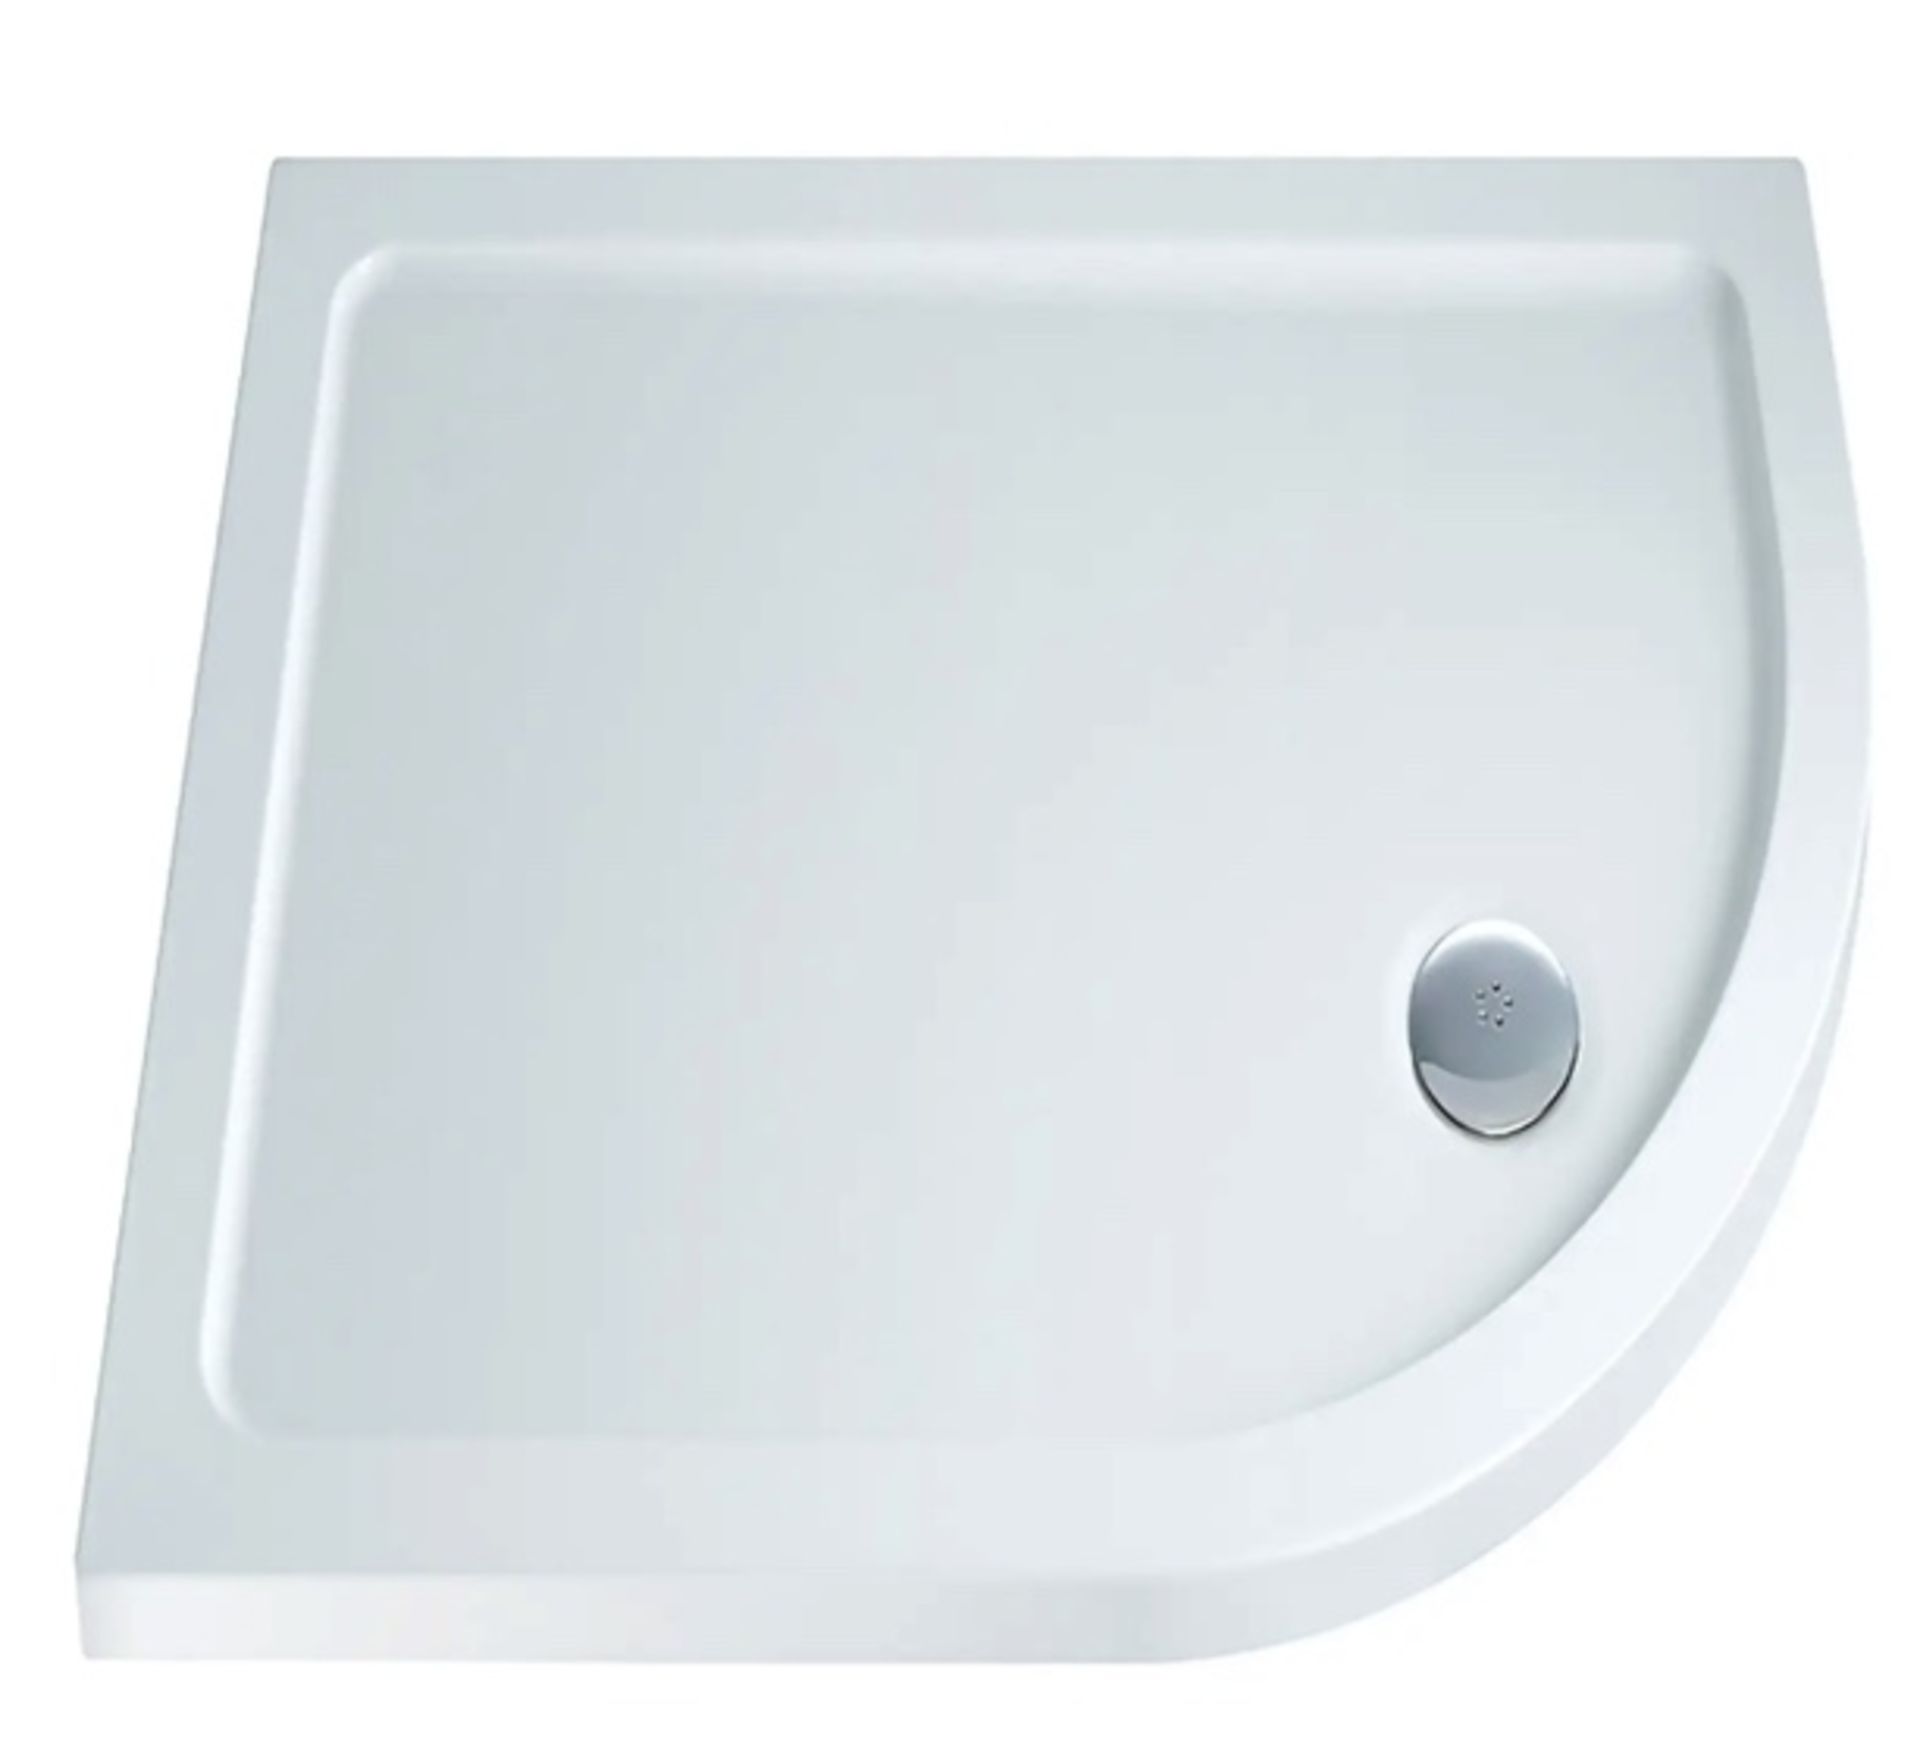 Brand New Boxed Emerge Left Hand Offset Quad Shower Tray - 1100x800mm RRP £144 **No Vat**